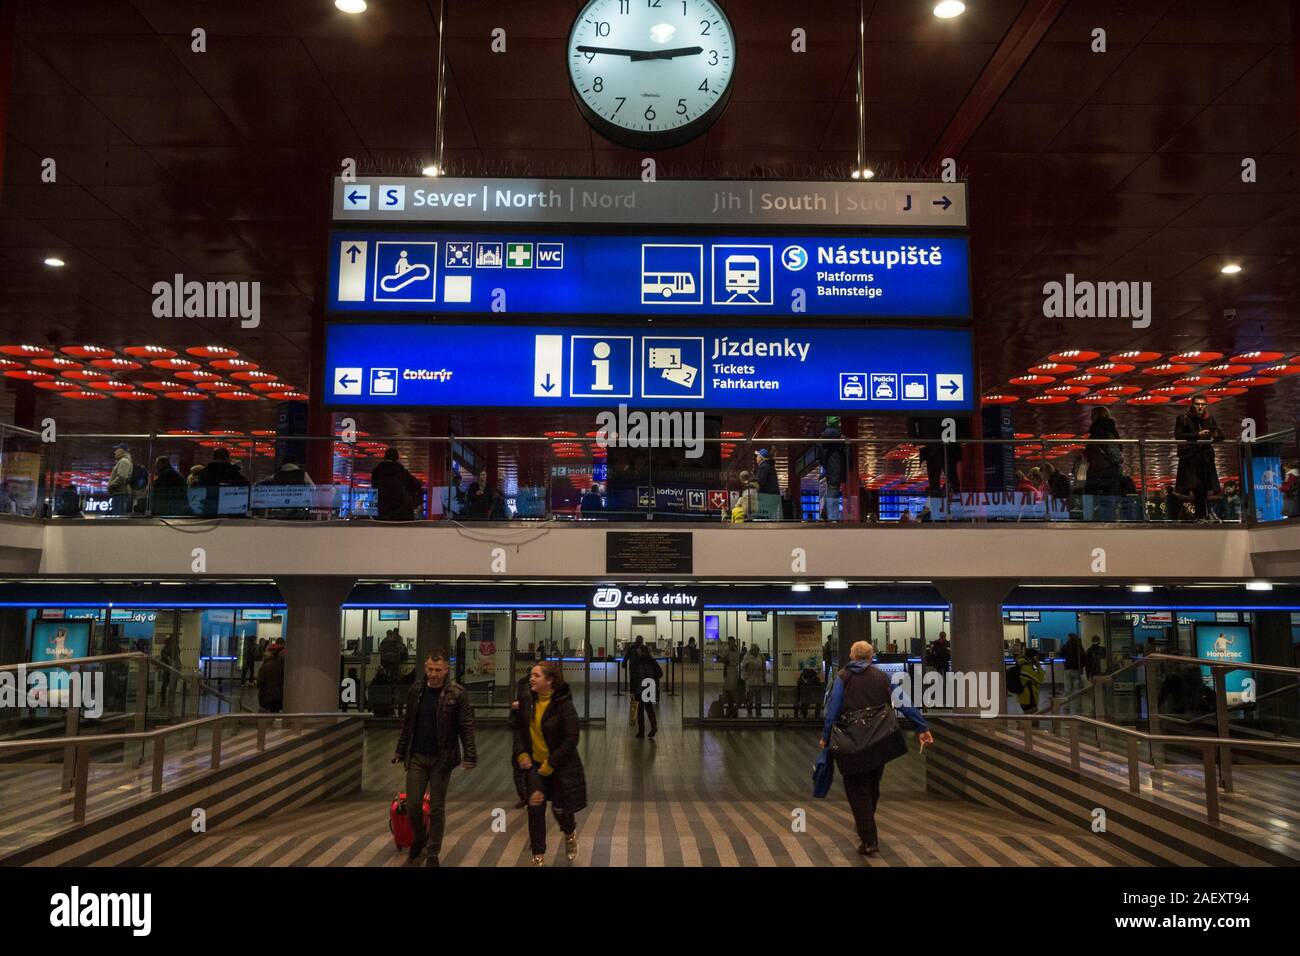 PRAGUE, CZECHIA - OCTOBER 31, 2019: Ticket counter and booth of Ceske Drahy, the Czech railways, in the Praha Hlavni Nadrazi train station with passen Stock Photo